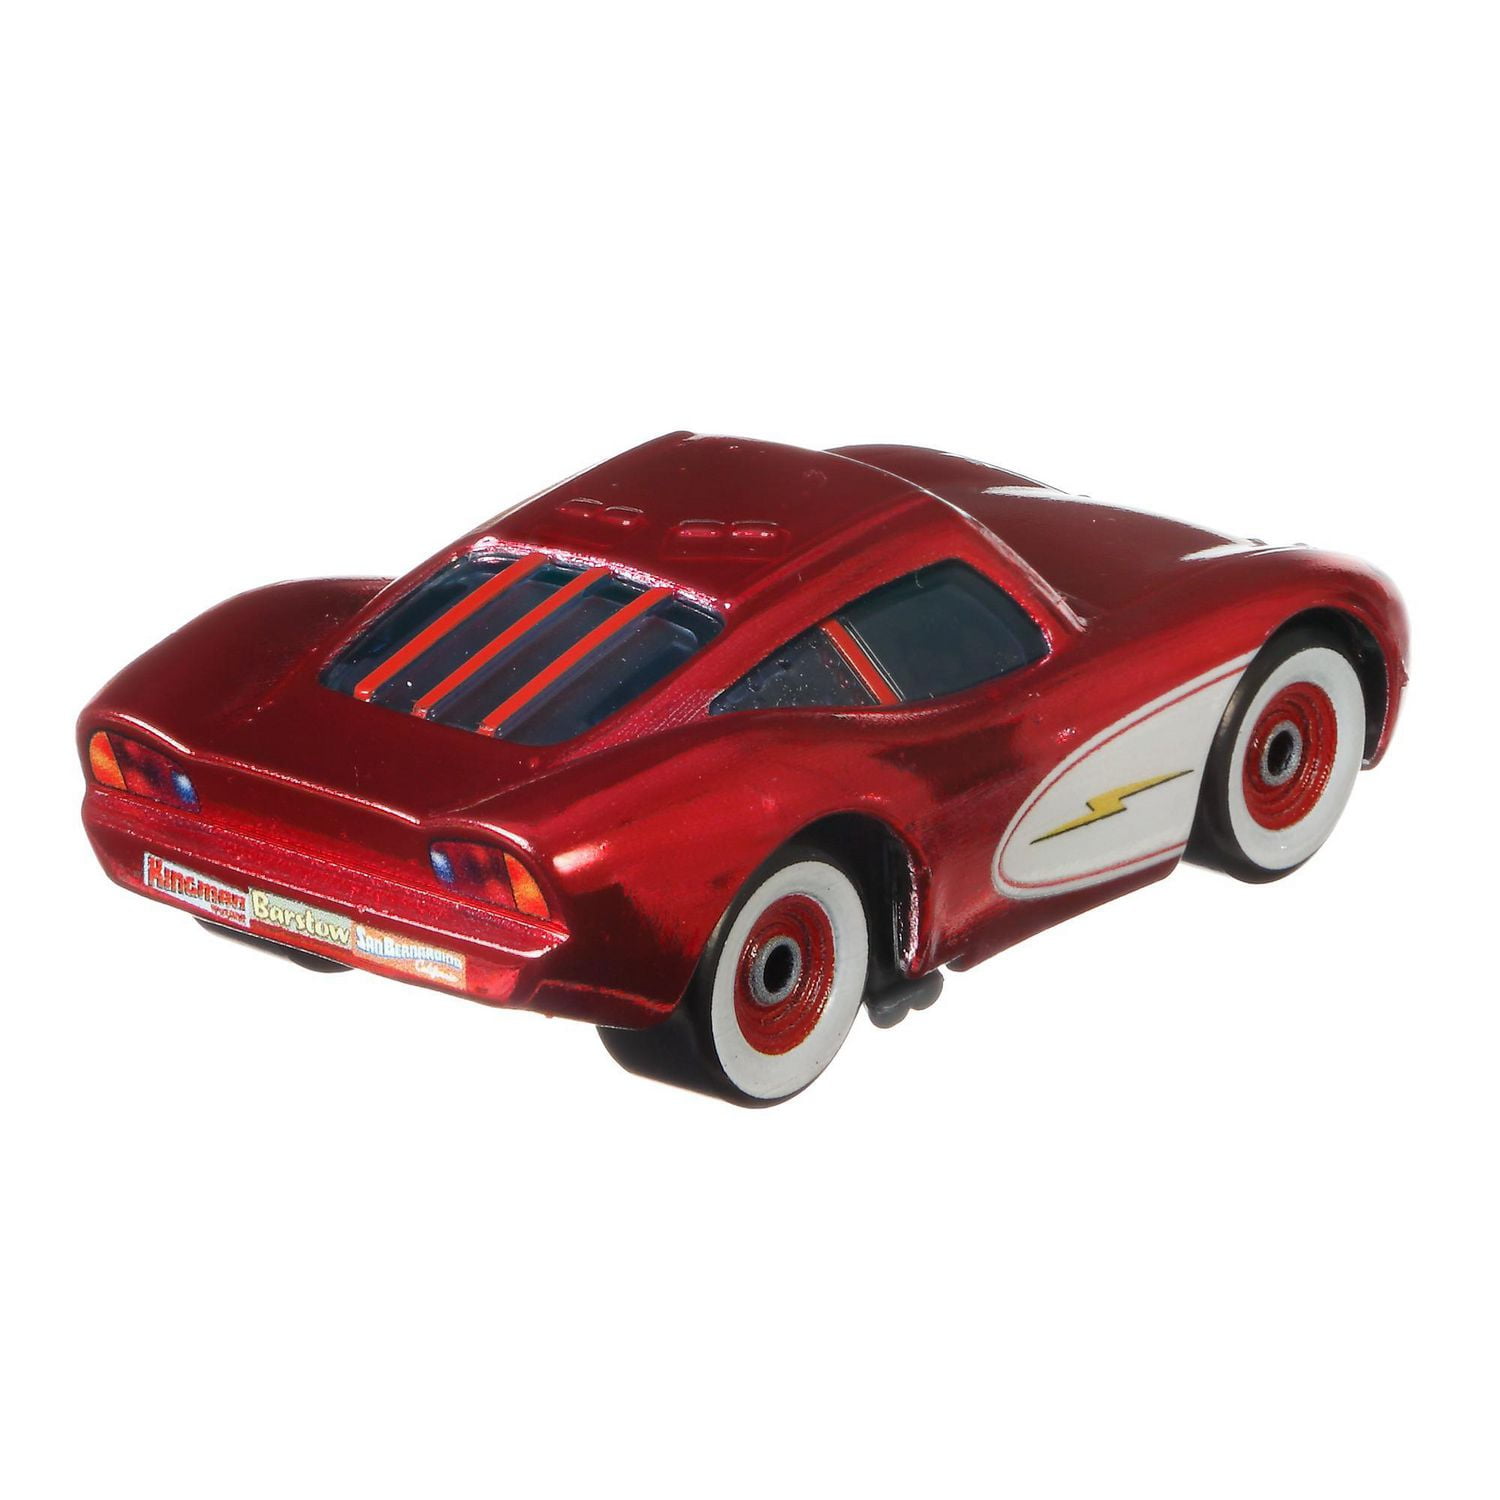 Cheap Disney Cars Toys  Up to 80% off a Wide Range of Disney Cars Toys –  PoundFun™